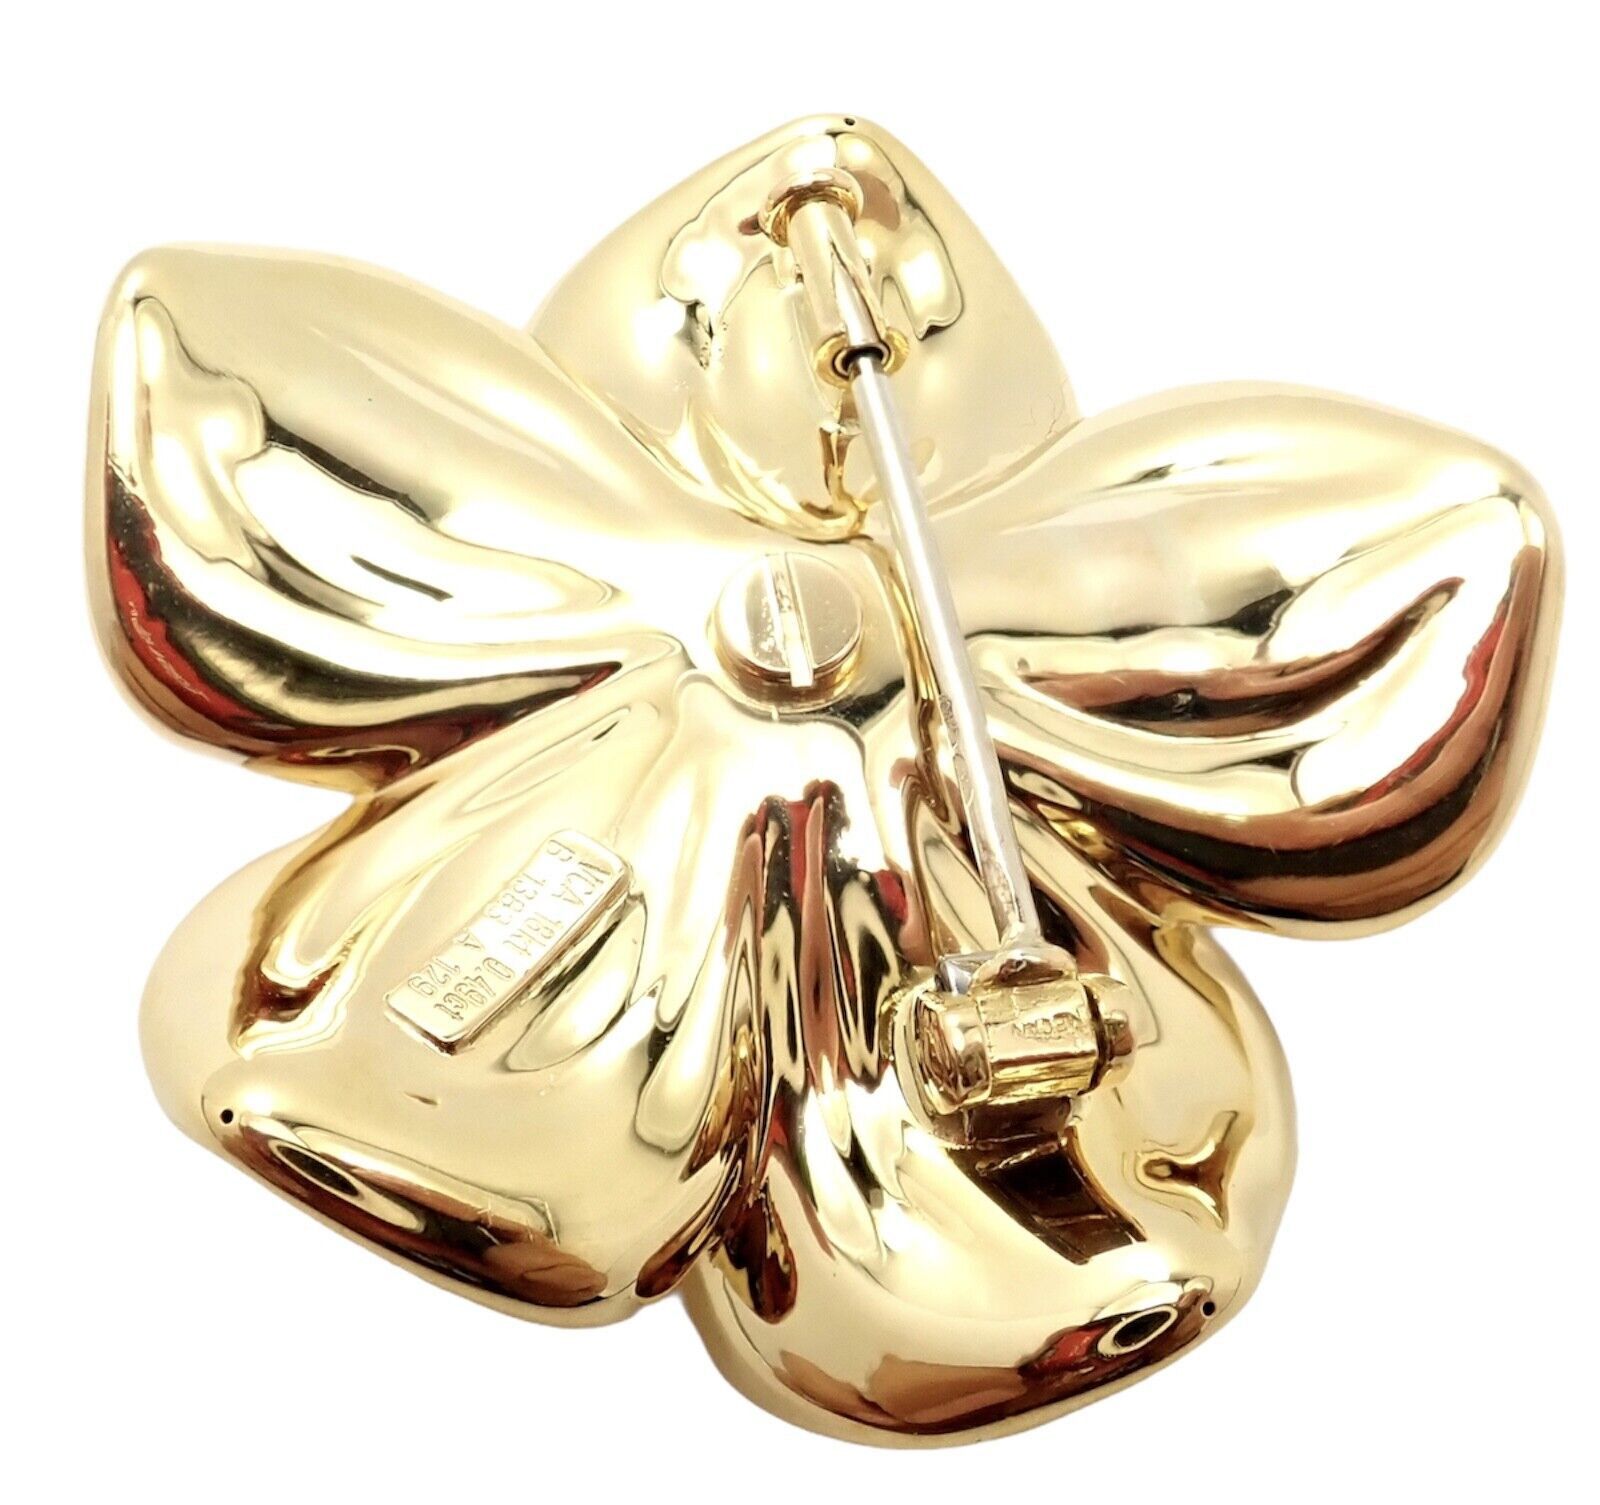 Van Cleef & Arpels Diamond 18k Yellow Gold Magnolia Flower Pin Brooch Size ONE SIZE - 4 Thumbnail